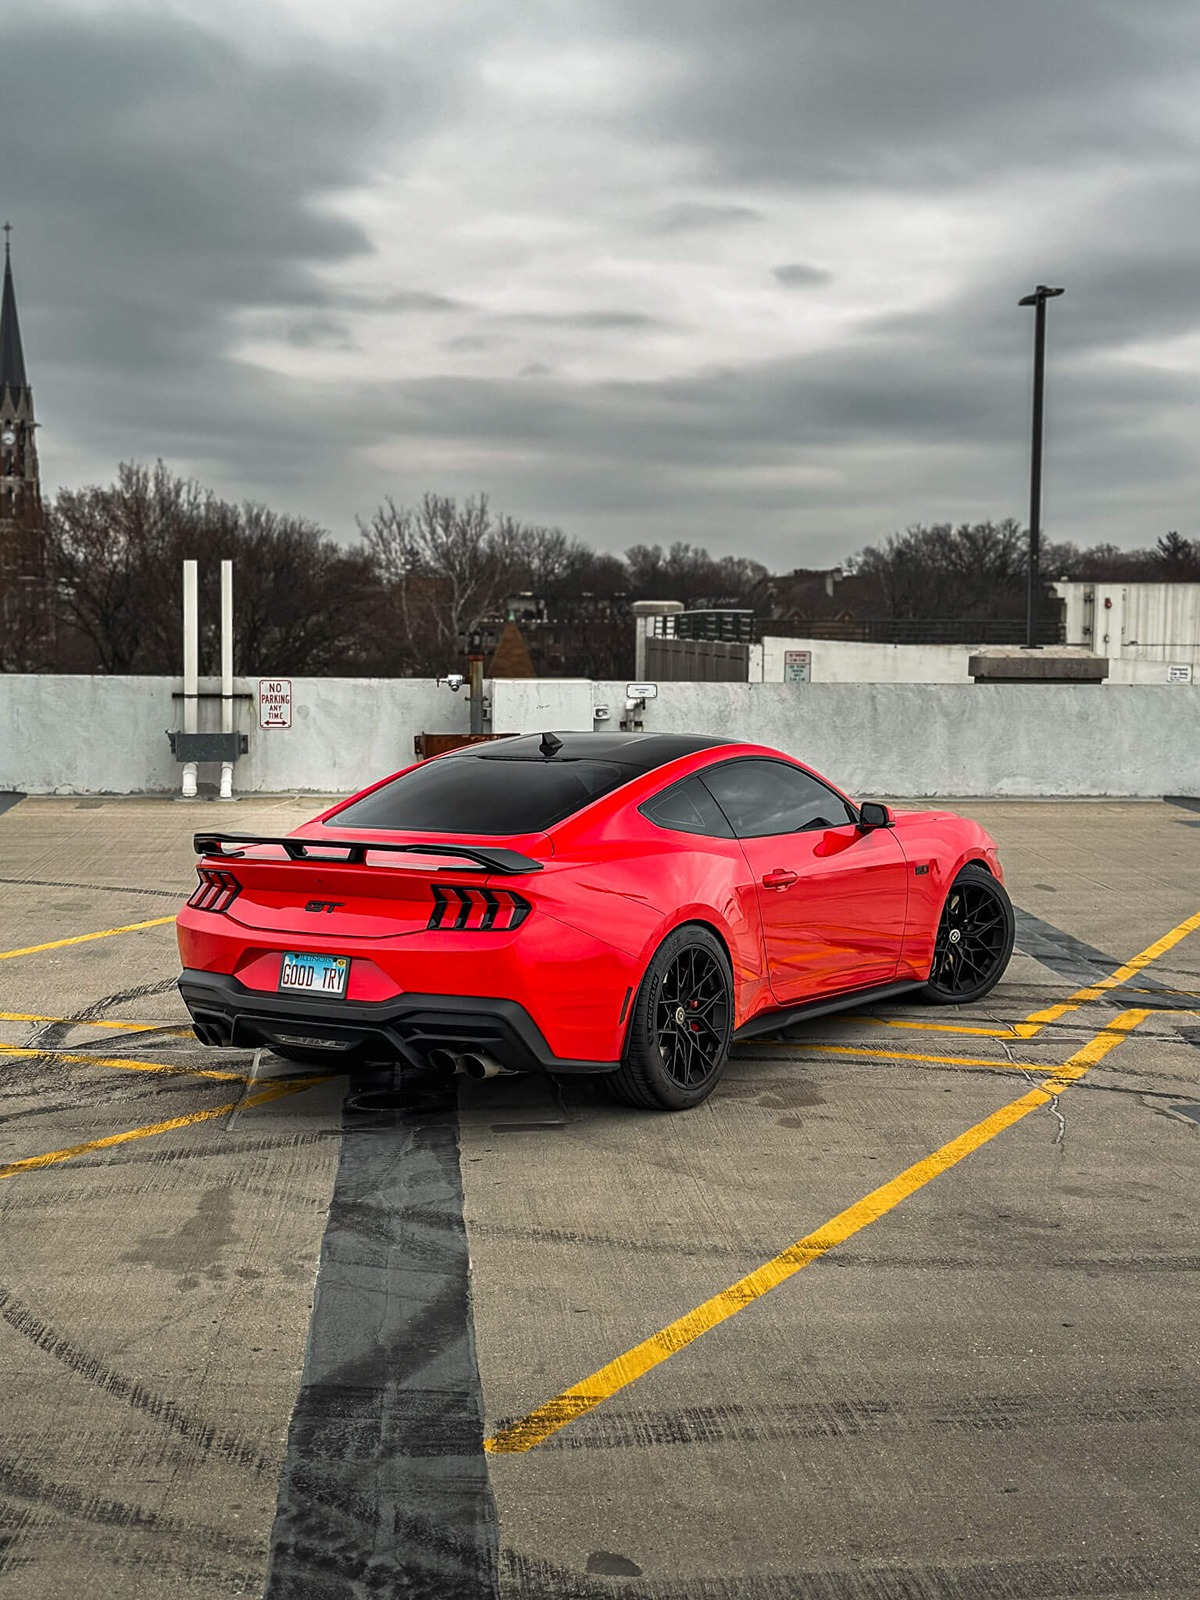 S650 Mustang S650 MUSTANG GT on HRE FF10 Wheels 2